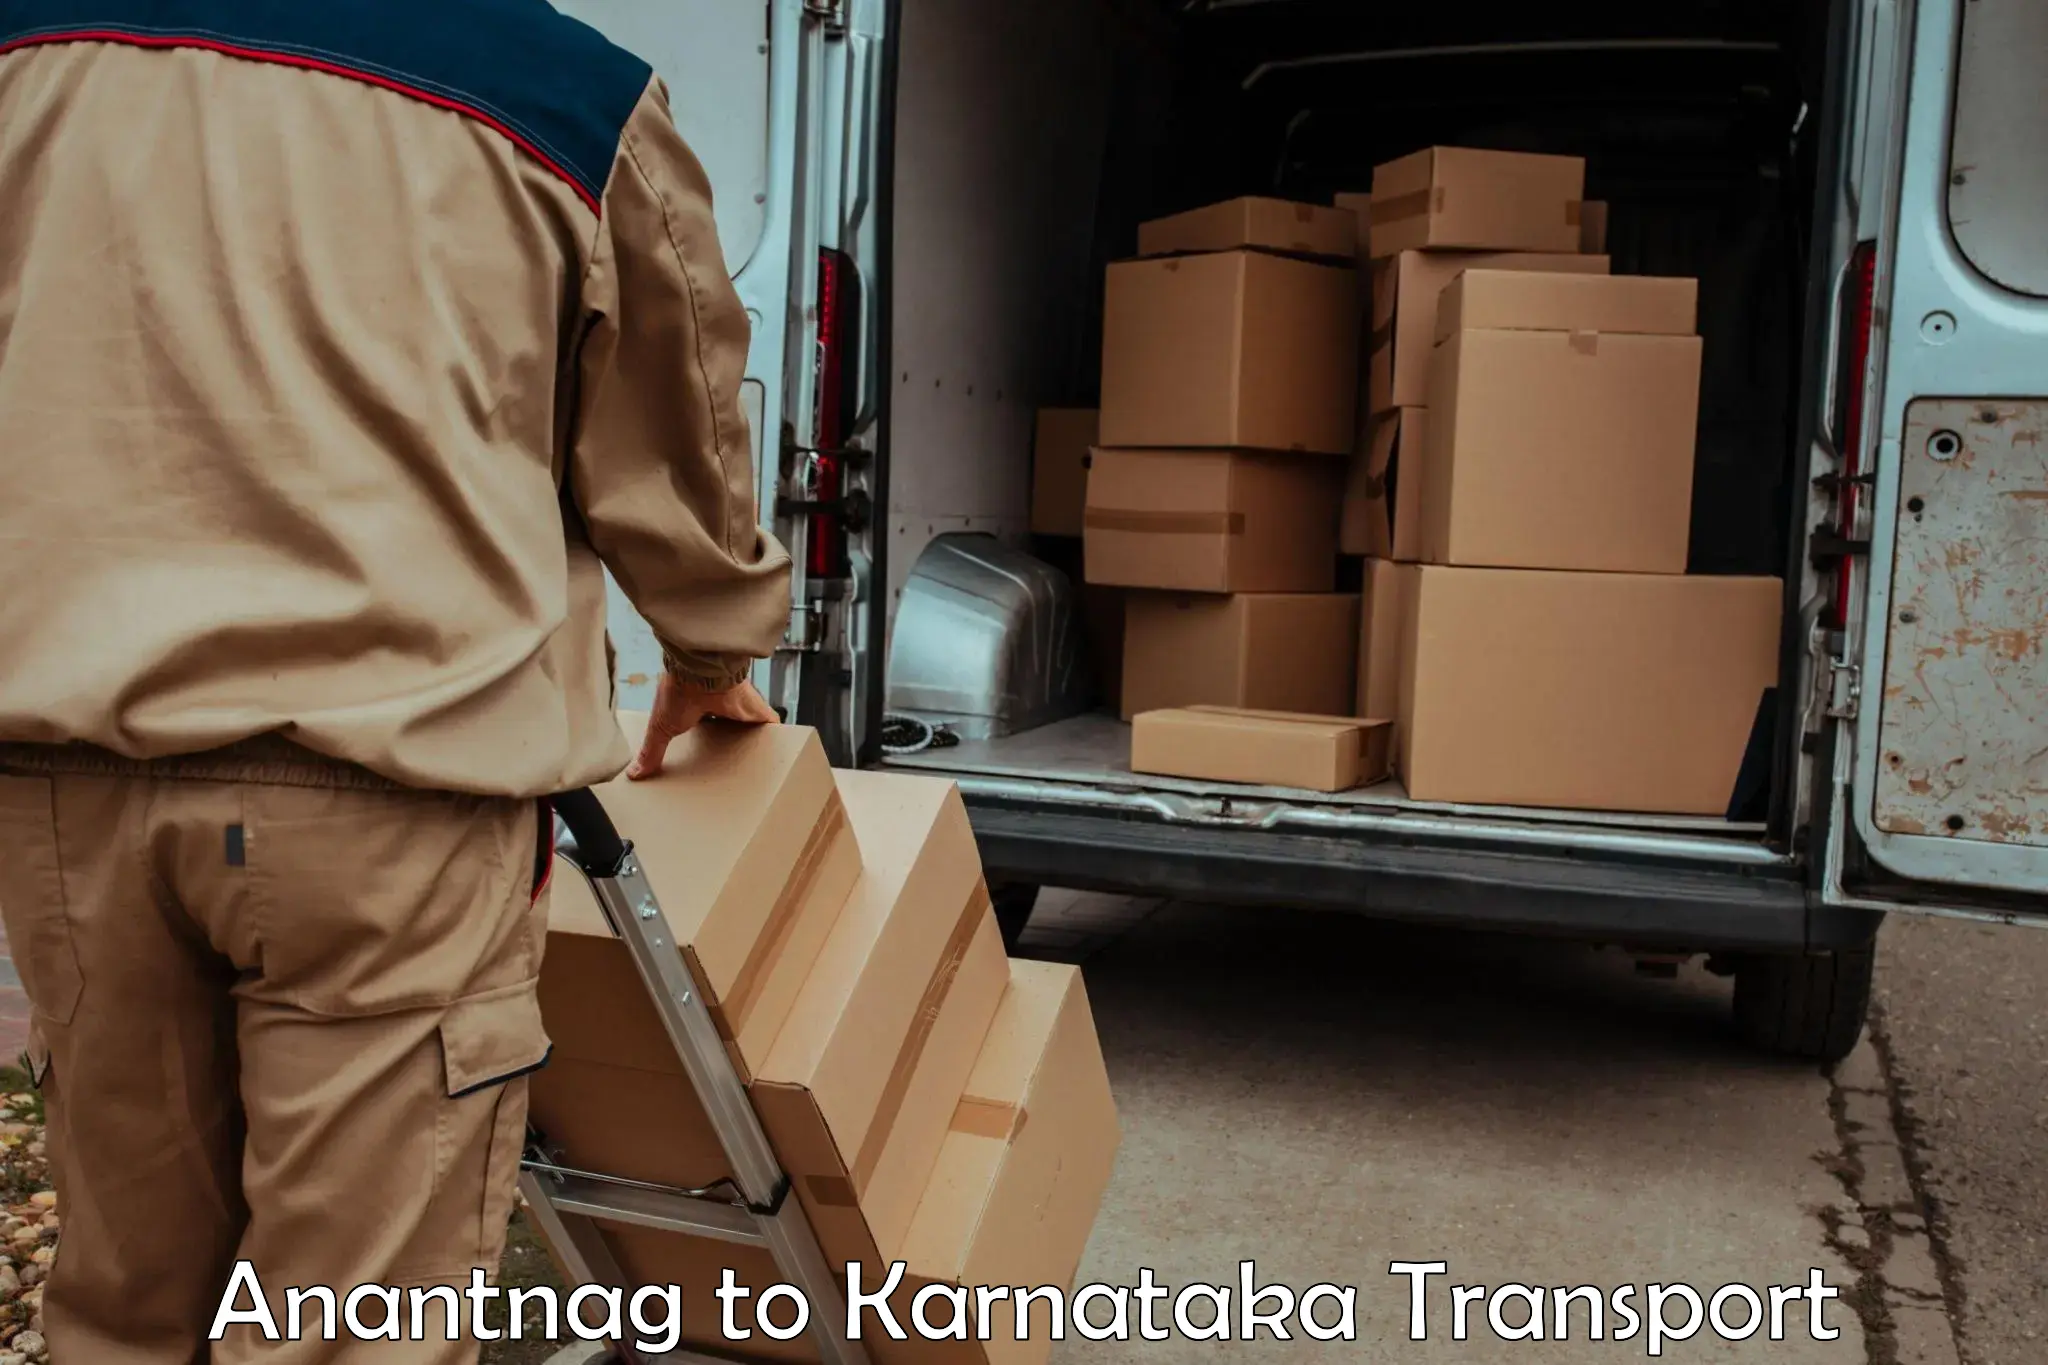 Truck transport companies in India Anantnag to Afzalpur